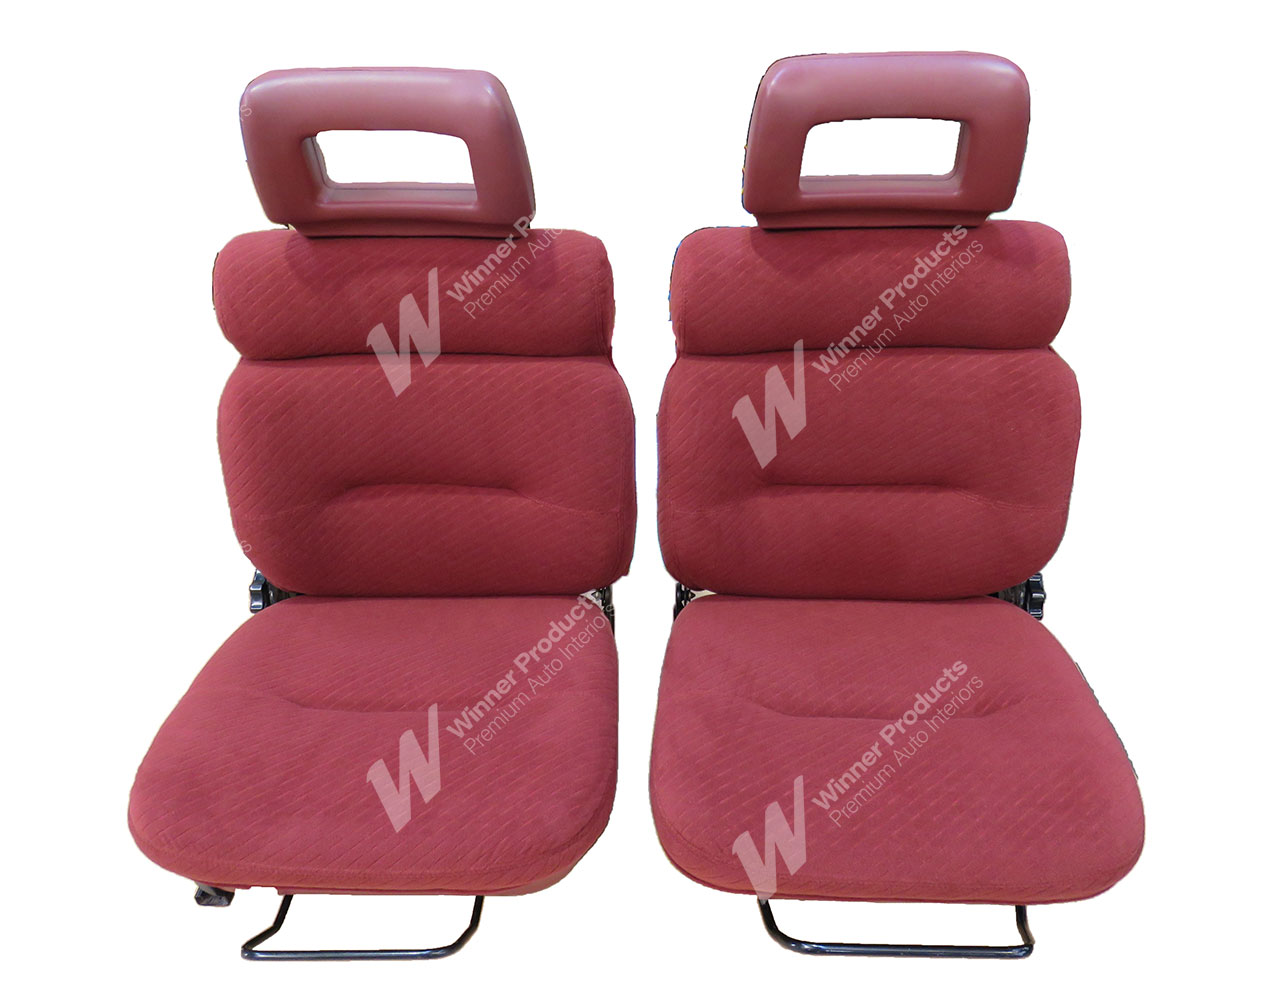 Holden Commodore VL Calais Sedan 75i Maderia Seat Covers (Image 2 of 5)